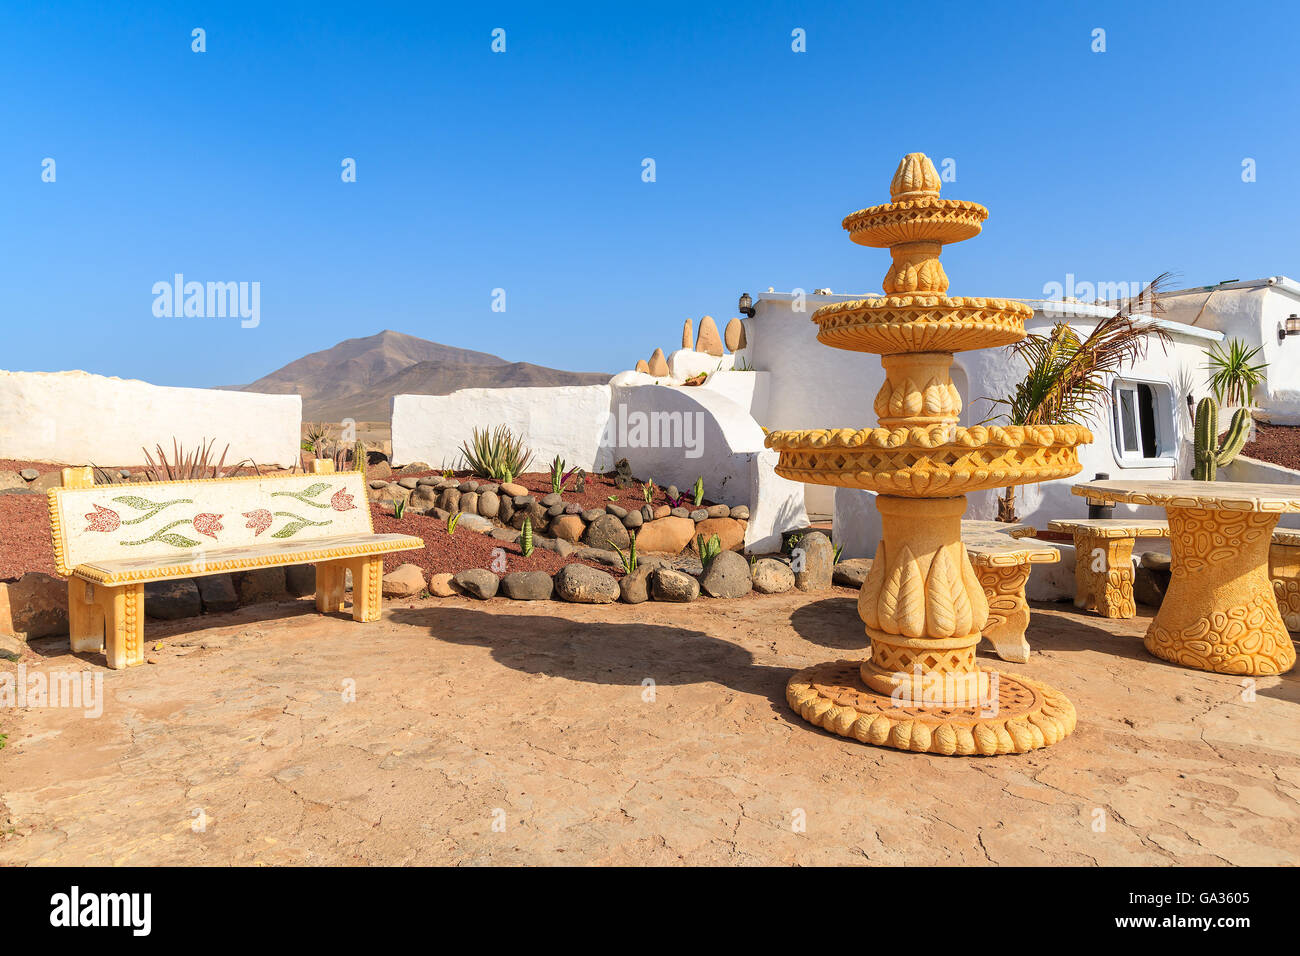 Bench and water fountain sculpture near Papagayo beach in mountain landscape of Lanzarote island, Spain Stock Photo